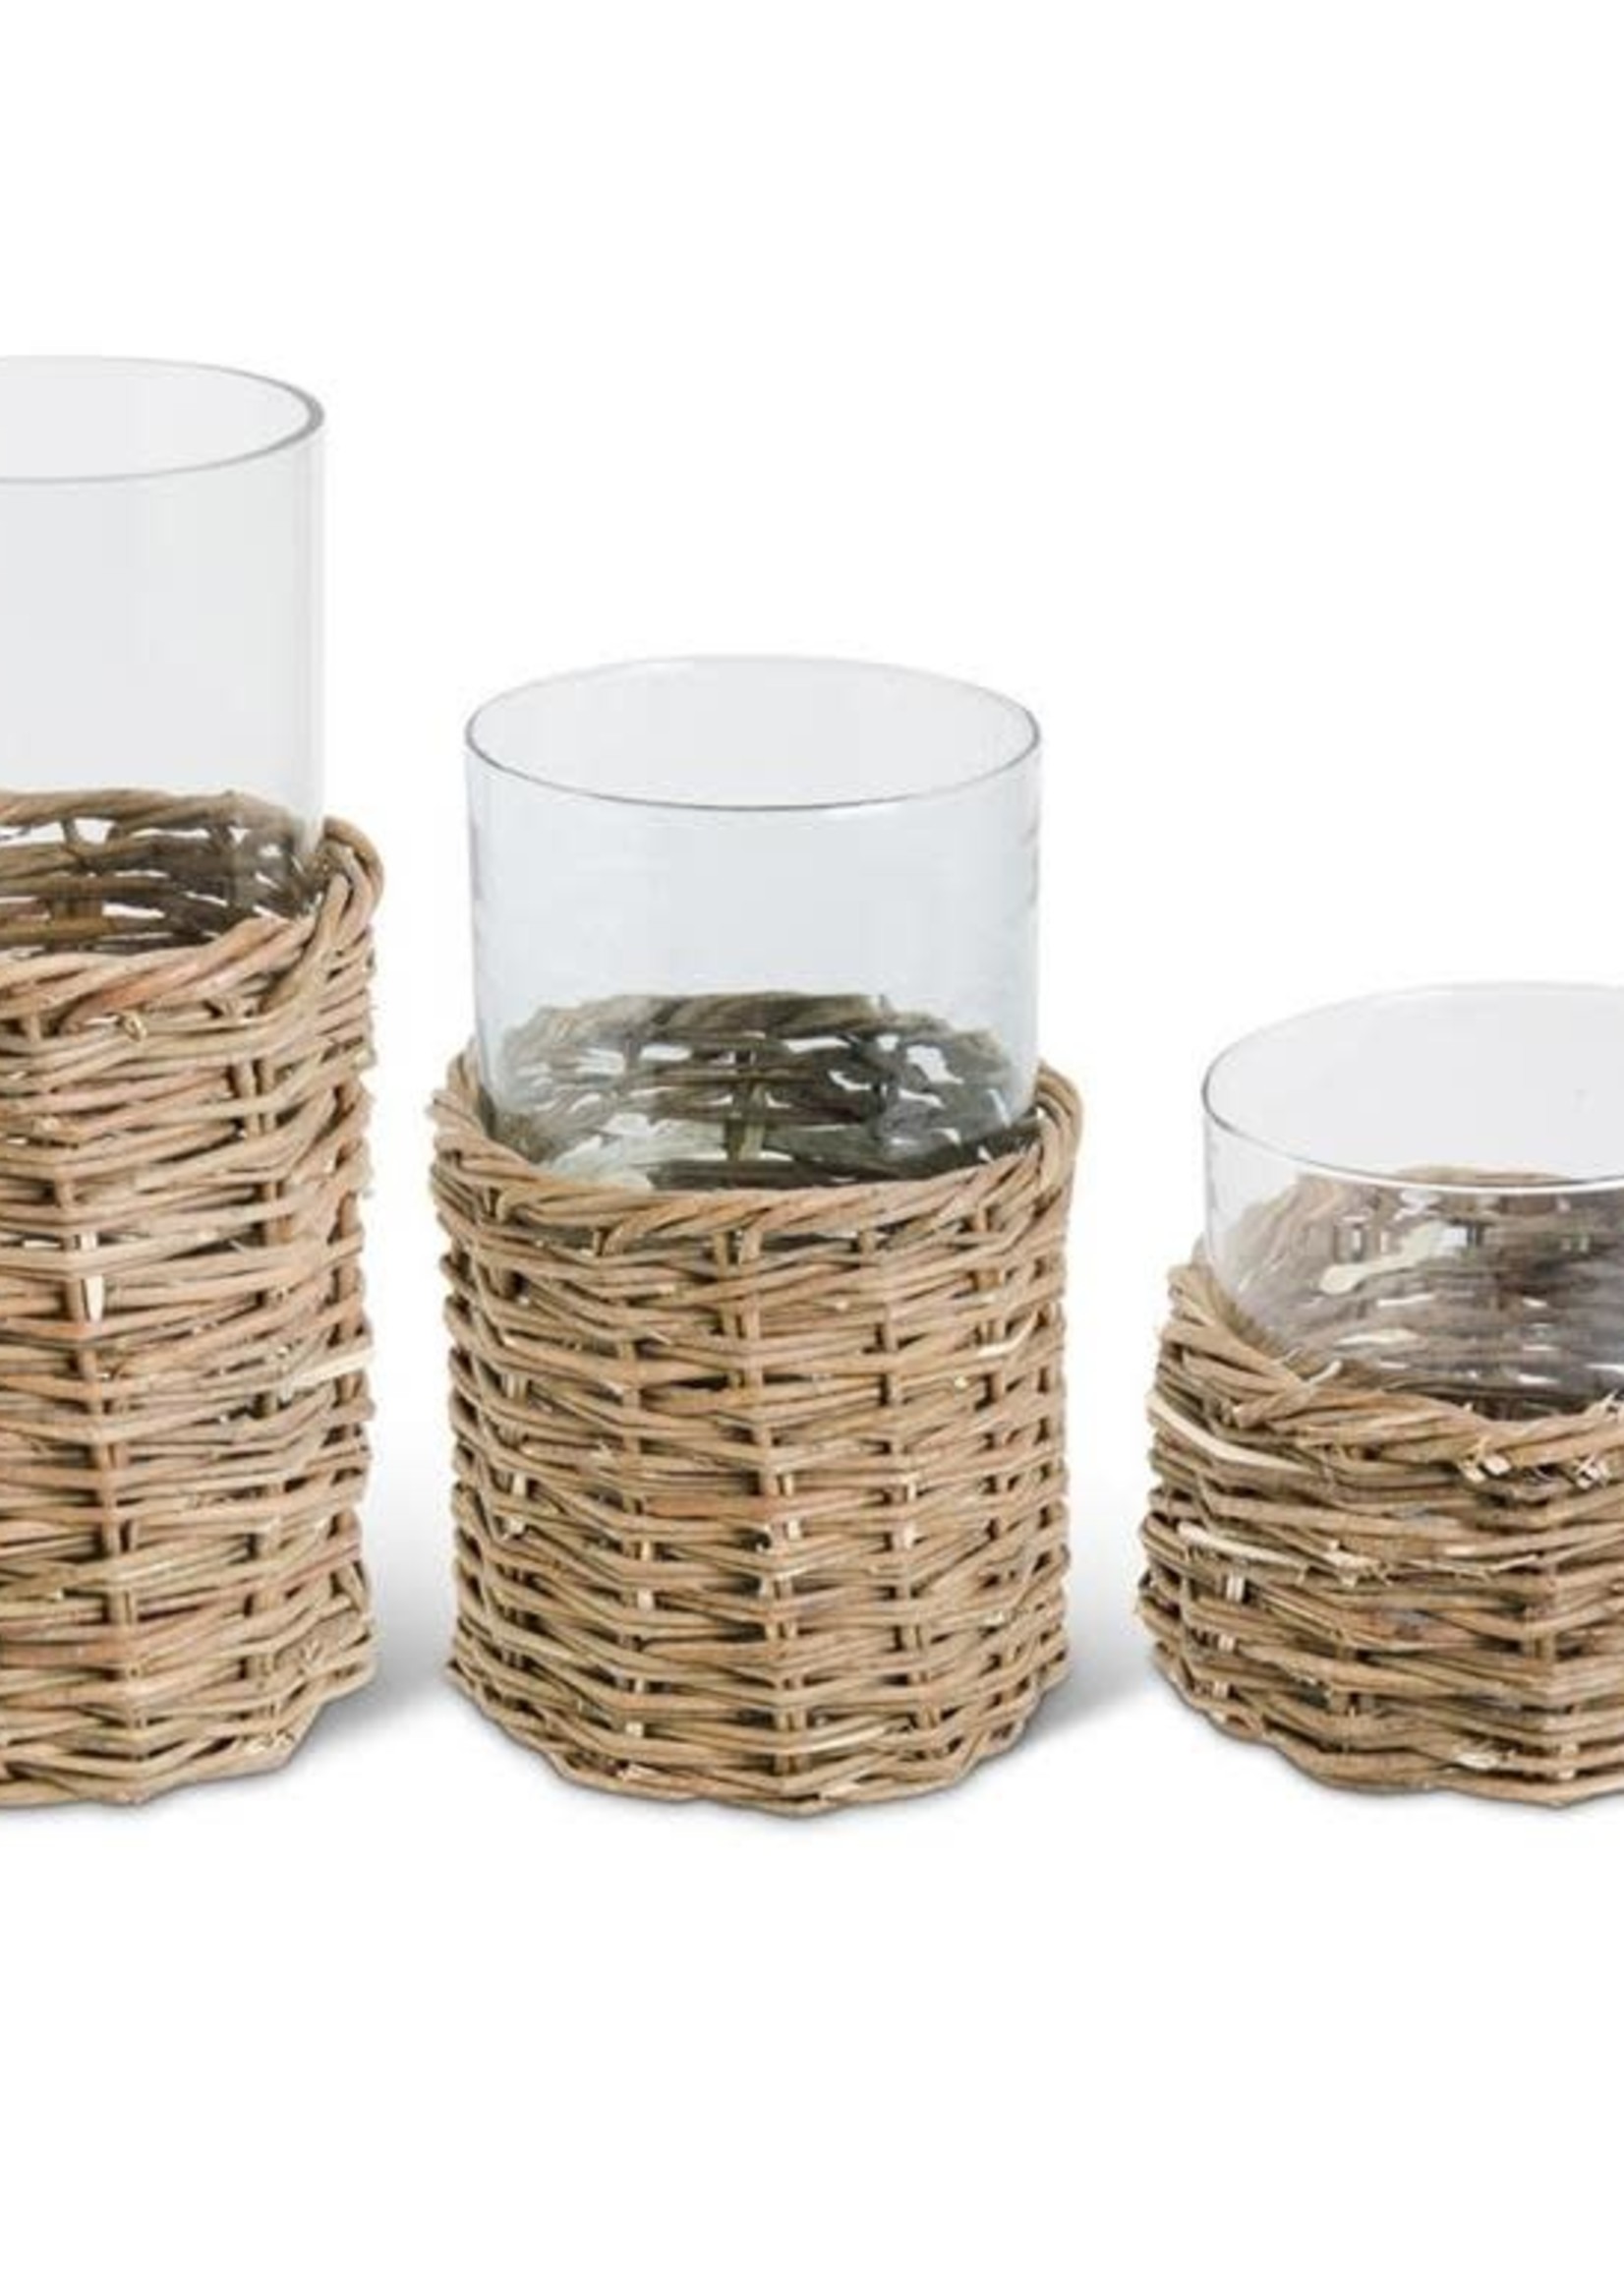 Design Decor Clear Glass Cylinders in Woven Rattan Basket Tall